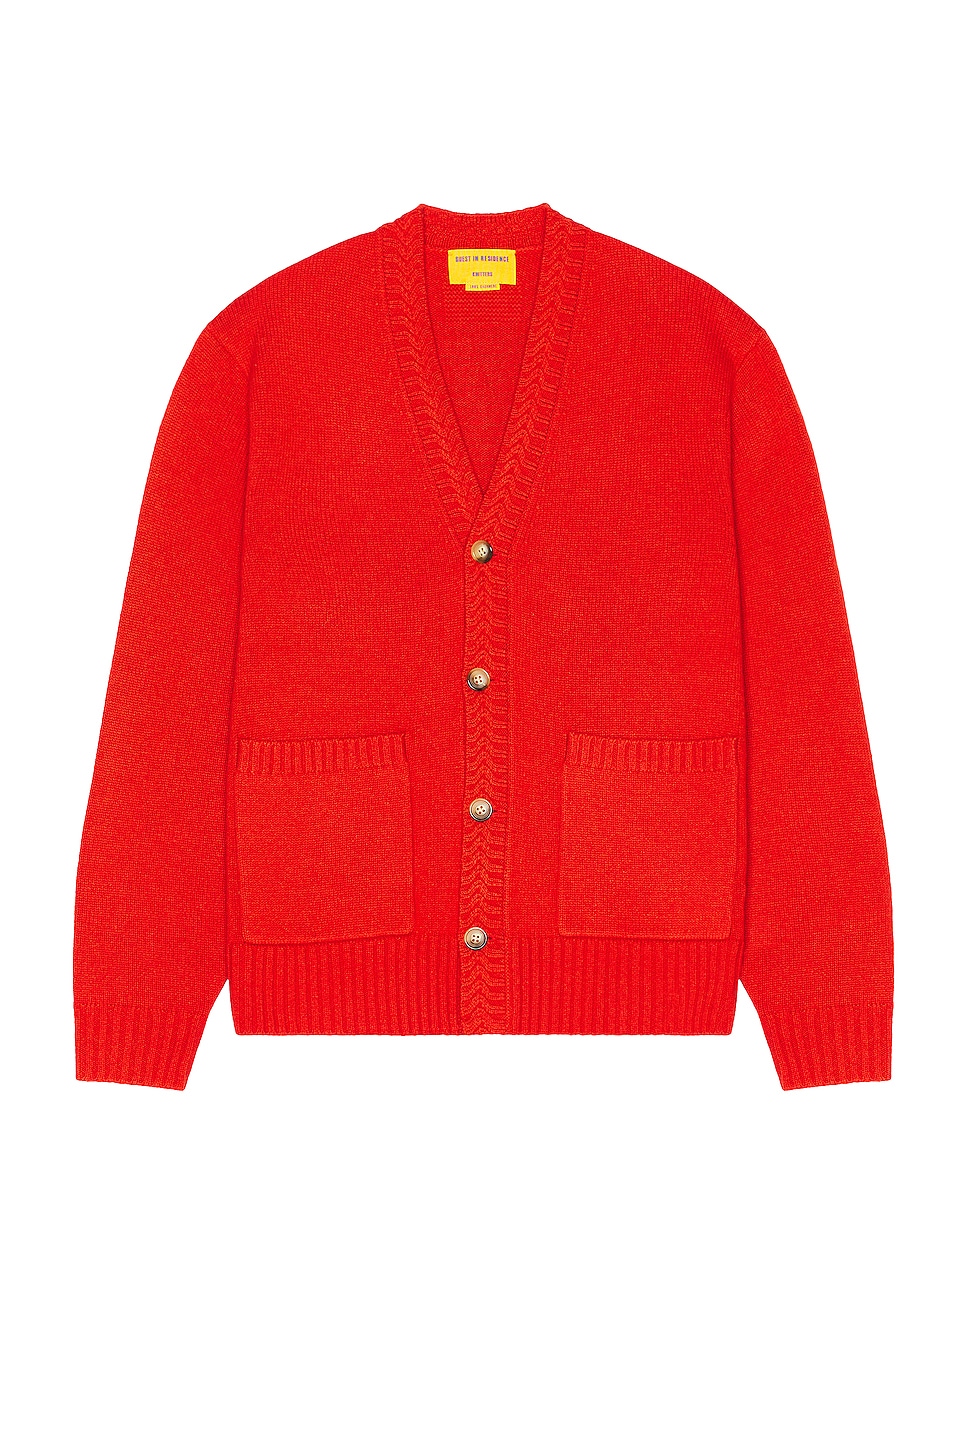 Image 1 of Guest In Residence The Cardigan in Cherry